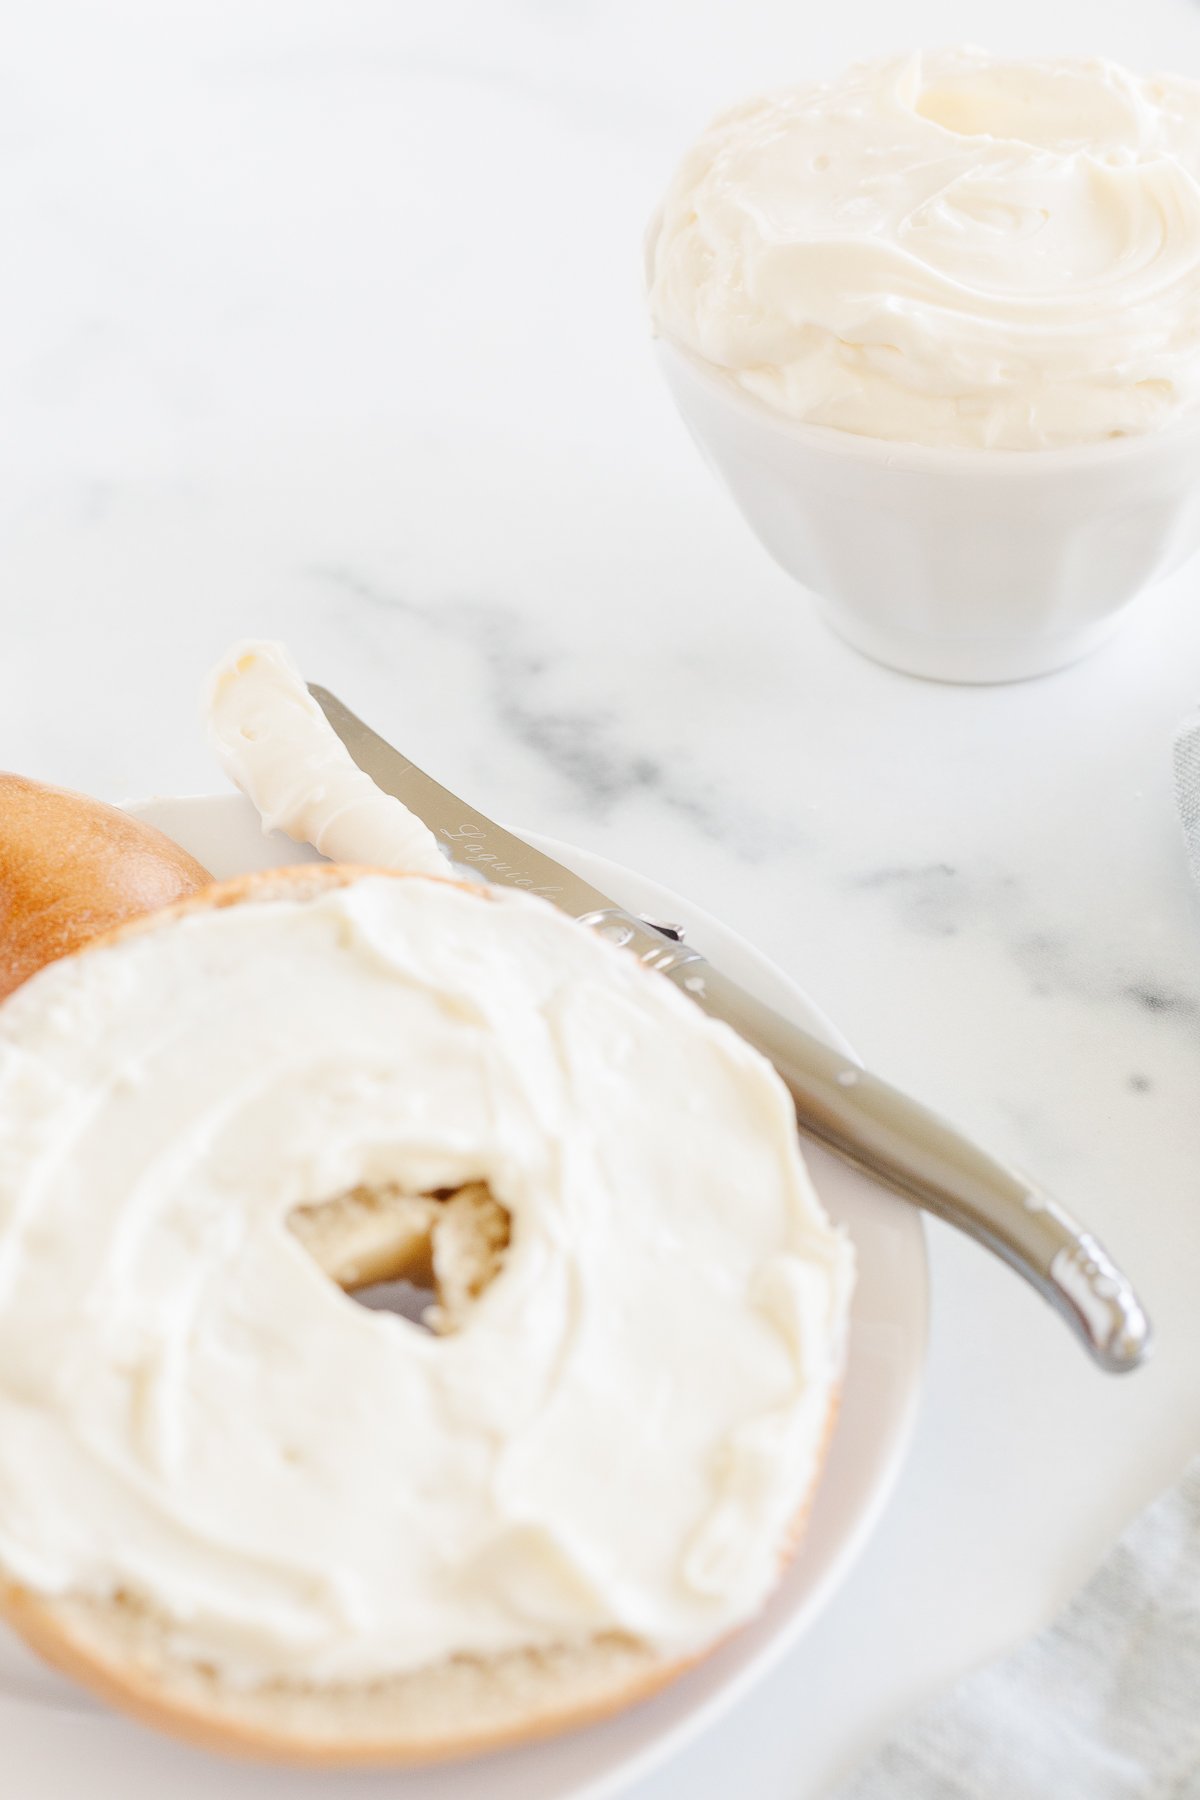 A bagel with whipped cream cheese and a knife next to it.